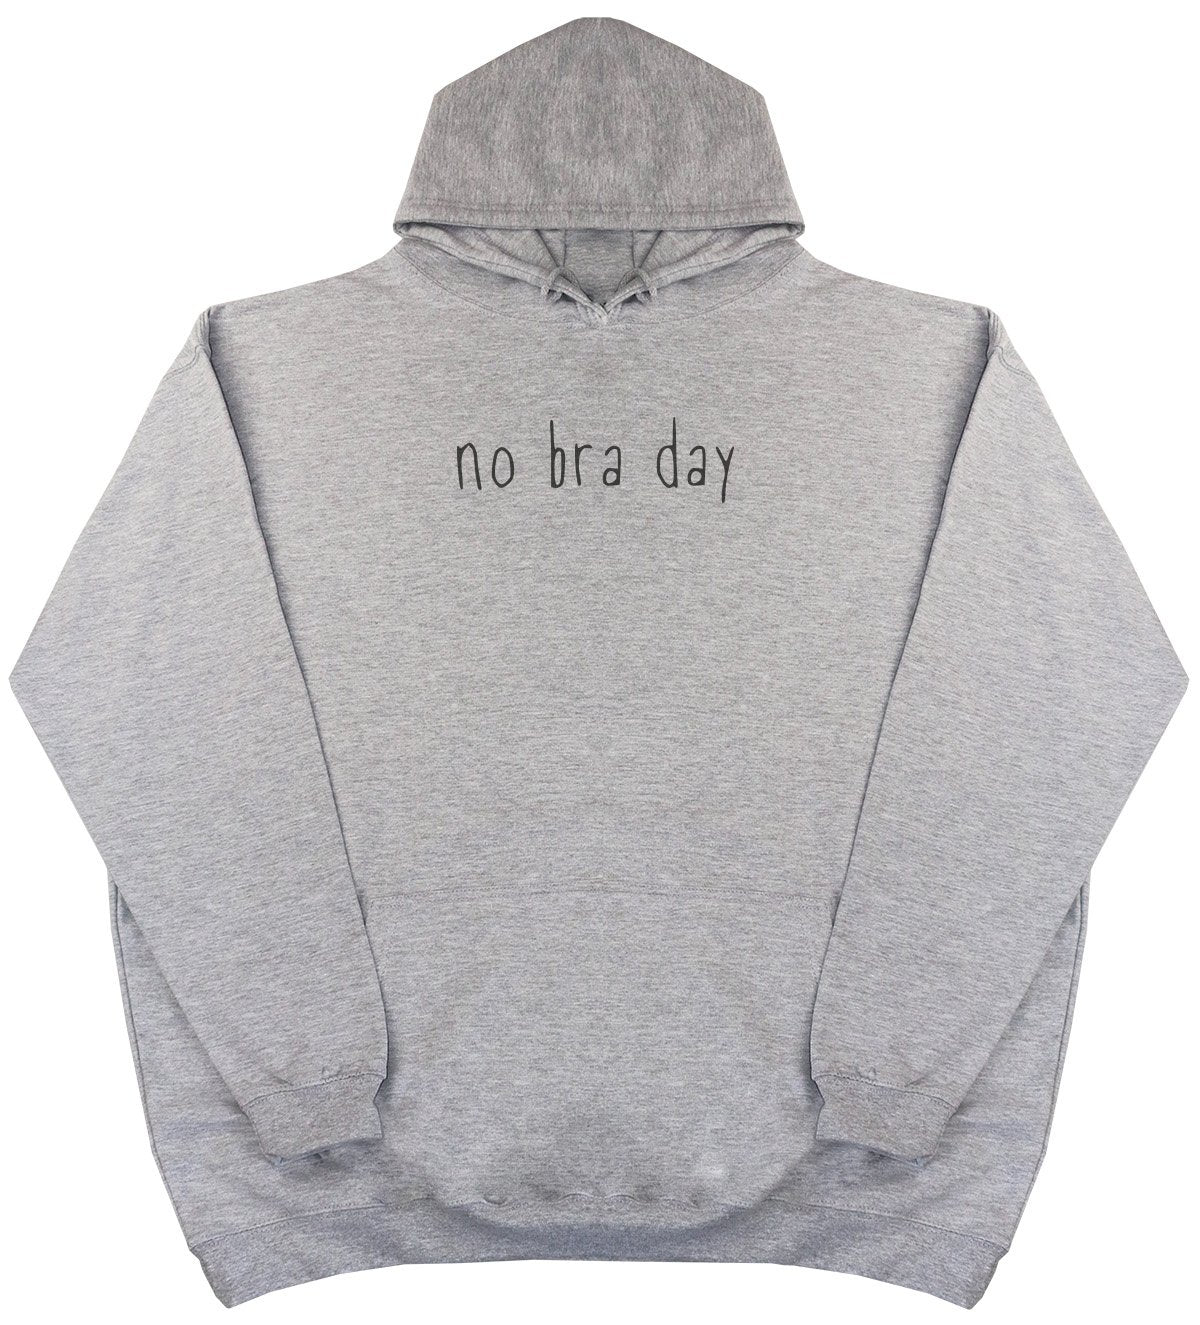 No Bra Day - New Style - Huge Size - Oversized Comfy Hoody